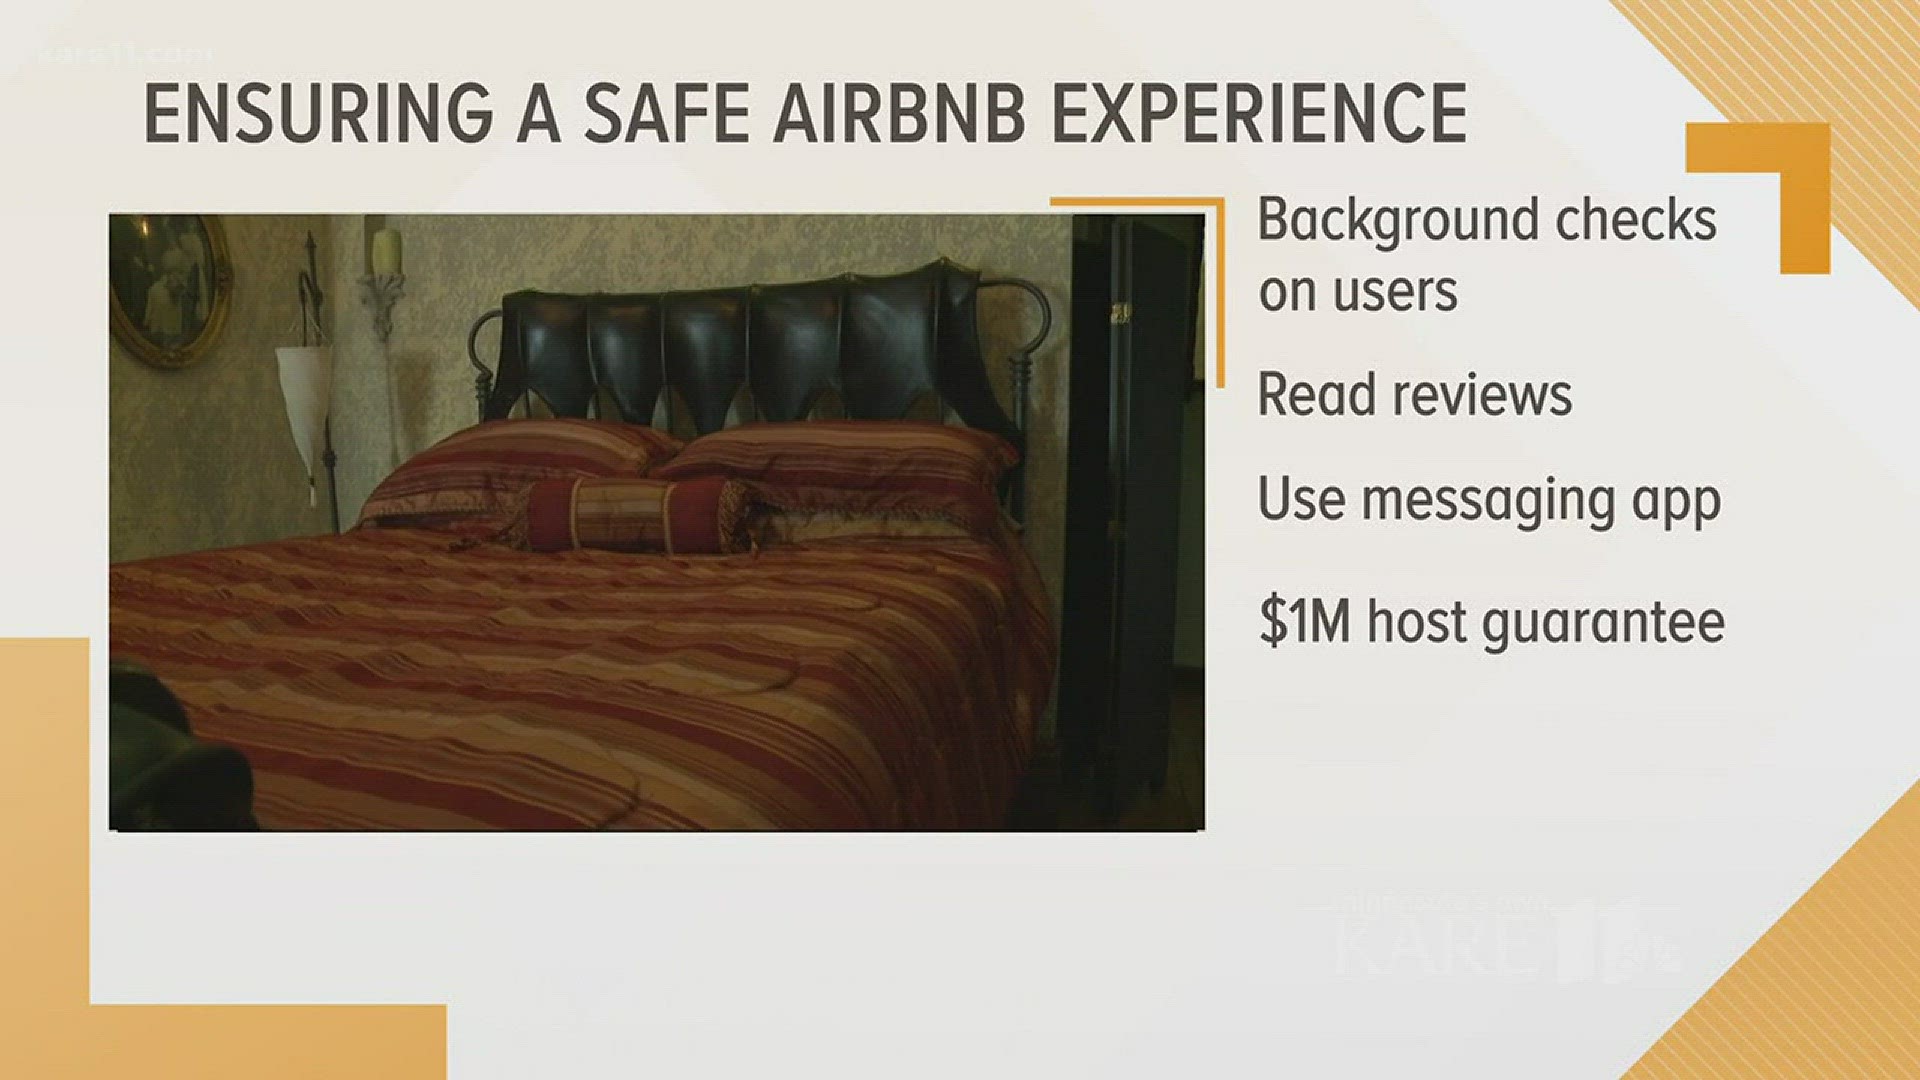 The operators of airbnb are urging Twin Cities residents renting out homes or rooms to Super Bowl guests to do their due diligence.